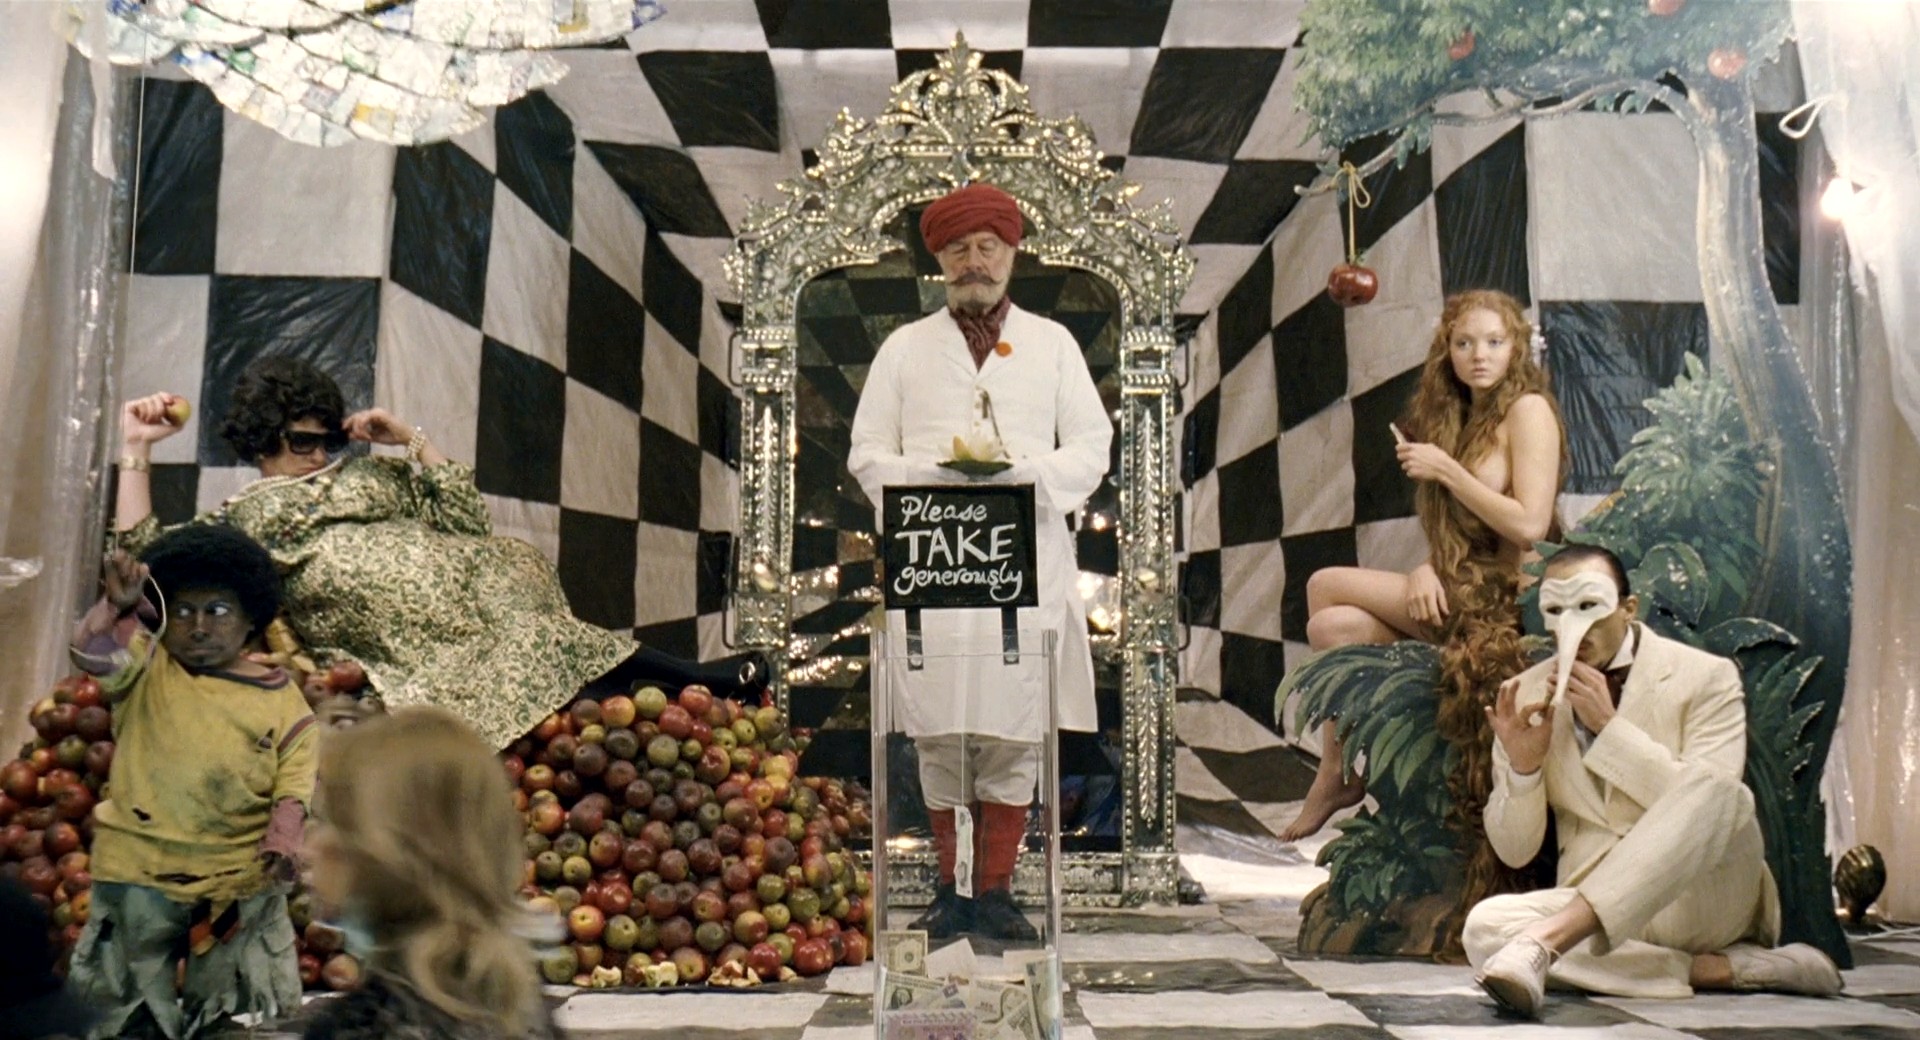 Dr Parnassus (Christopher Plummer) (standing centre) offers the way beyond the mirror. With Lily Cole and Heath Ledger (in mask) to his right in The Imaginarium of Doctor Parnassus (2009)